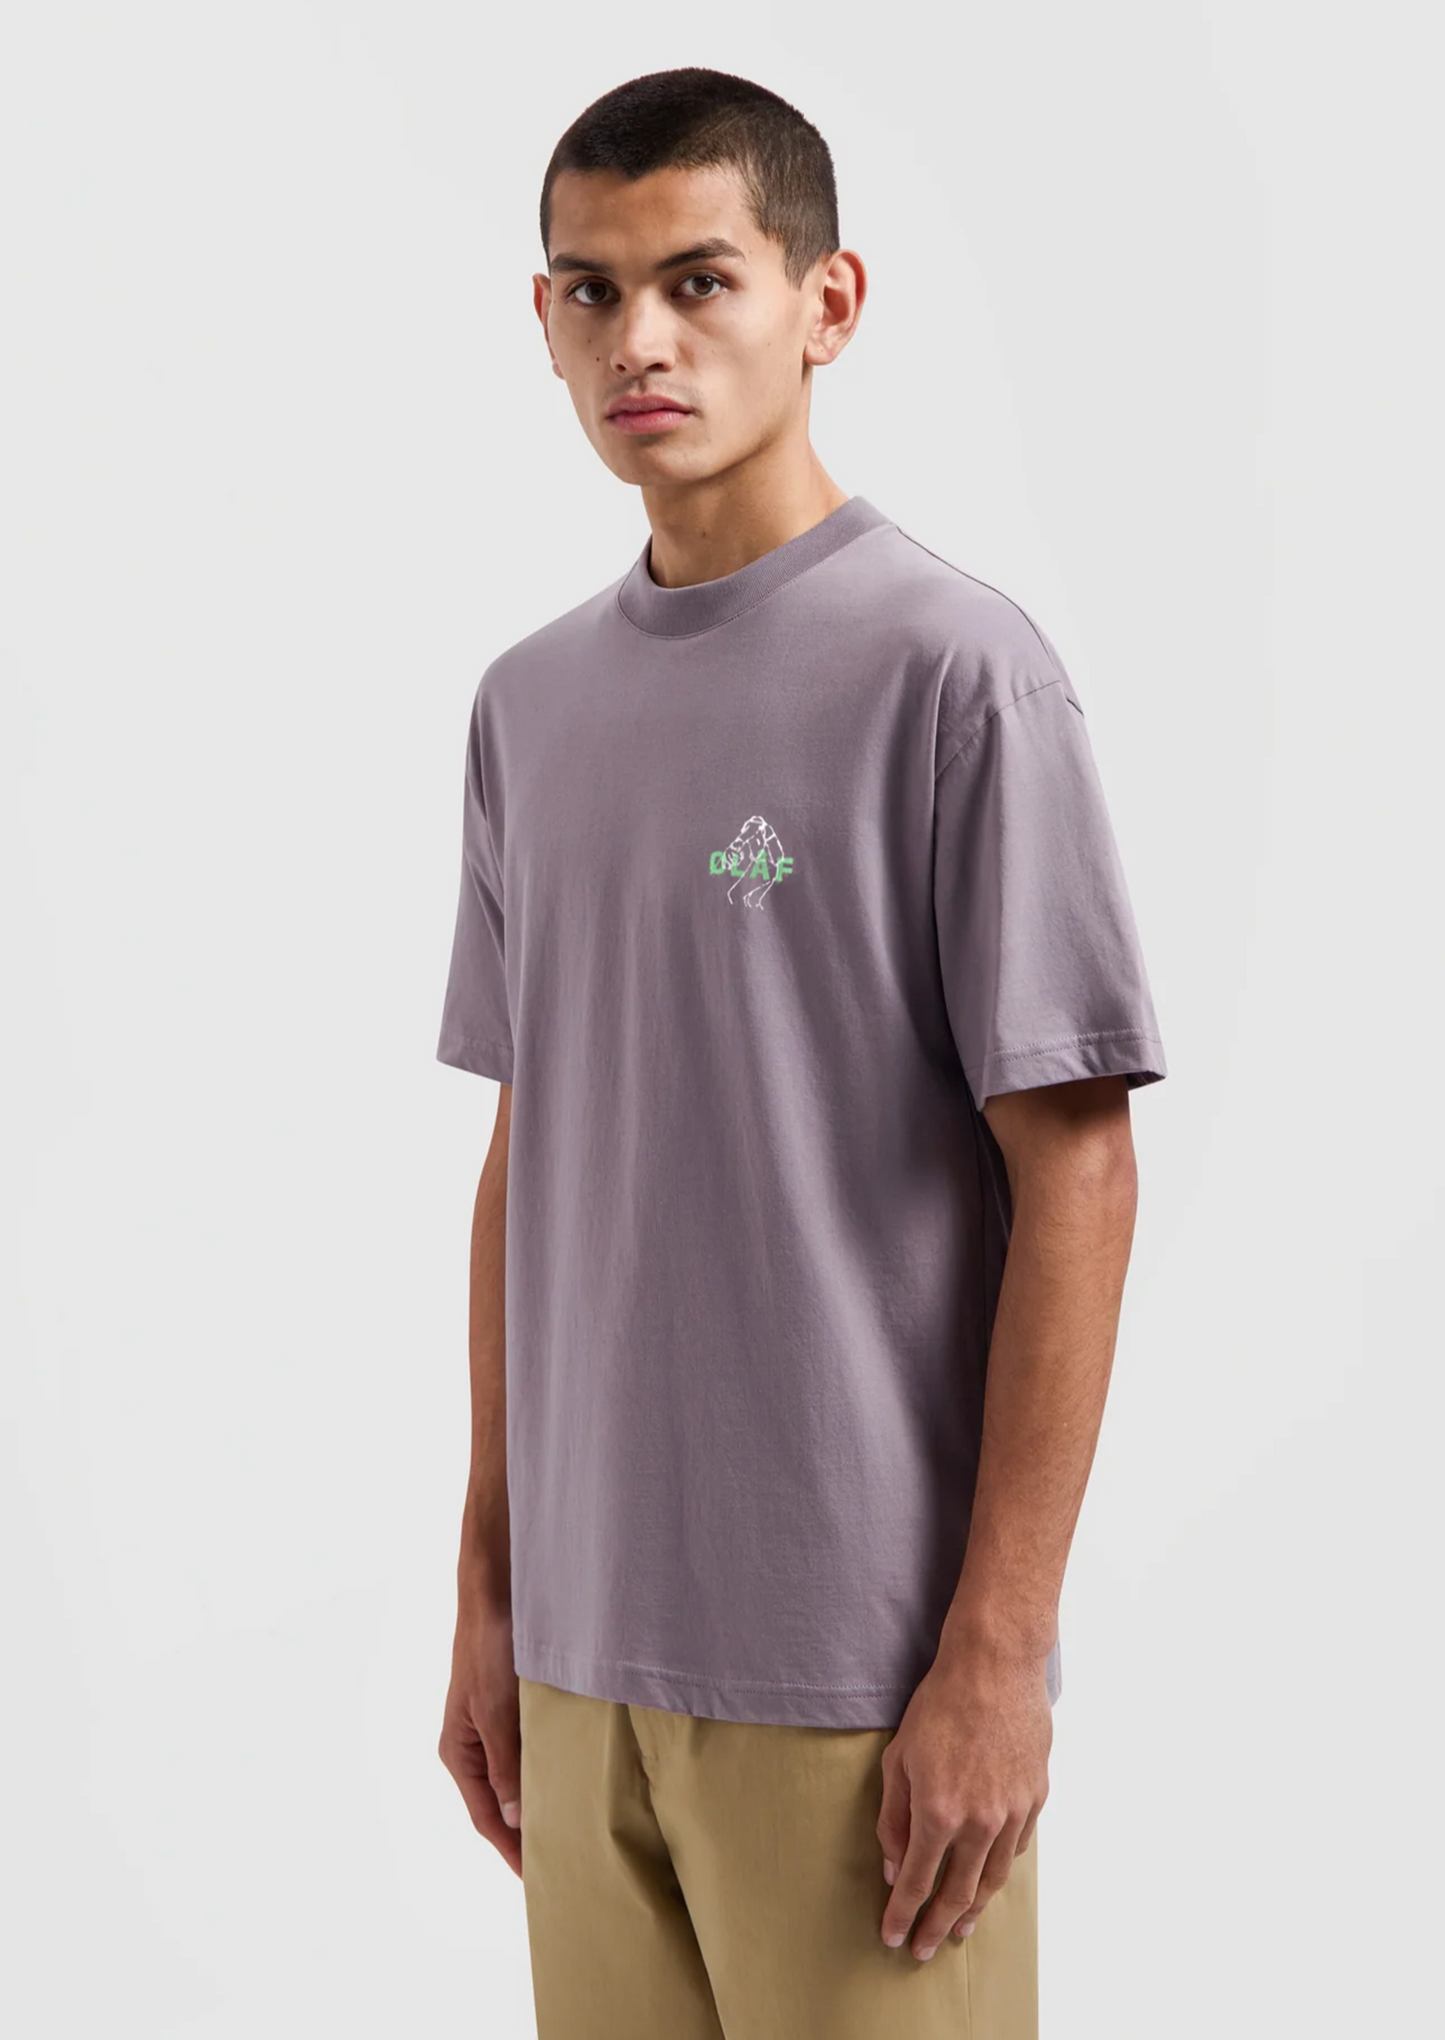 DIVER OUTLINE TEE STONE GRAY